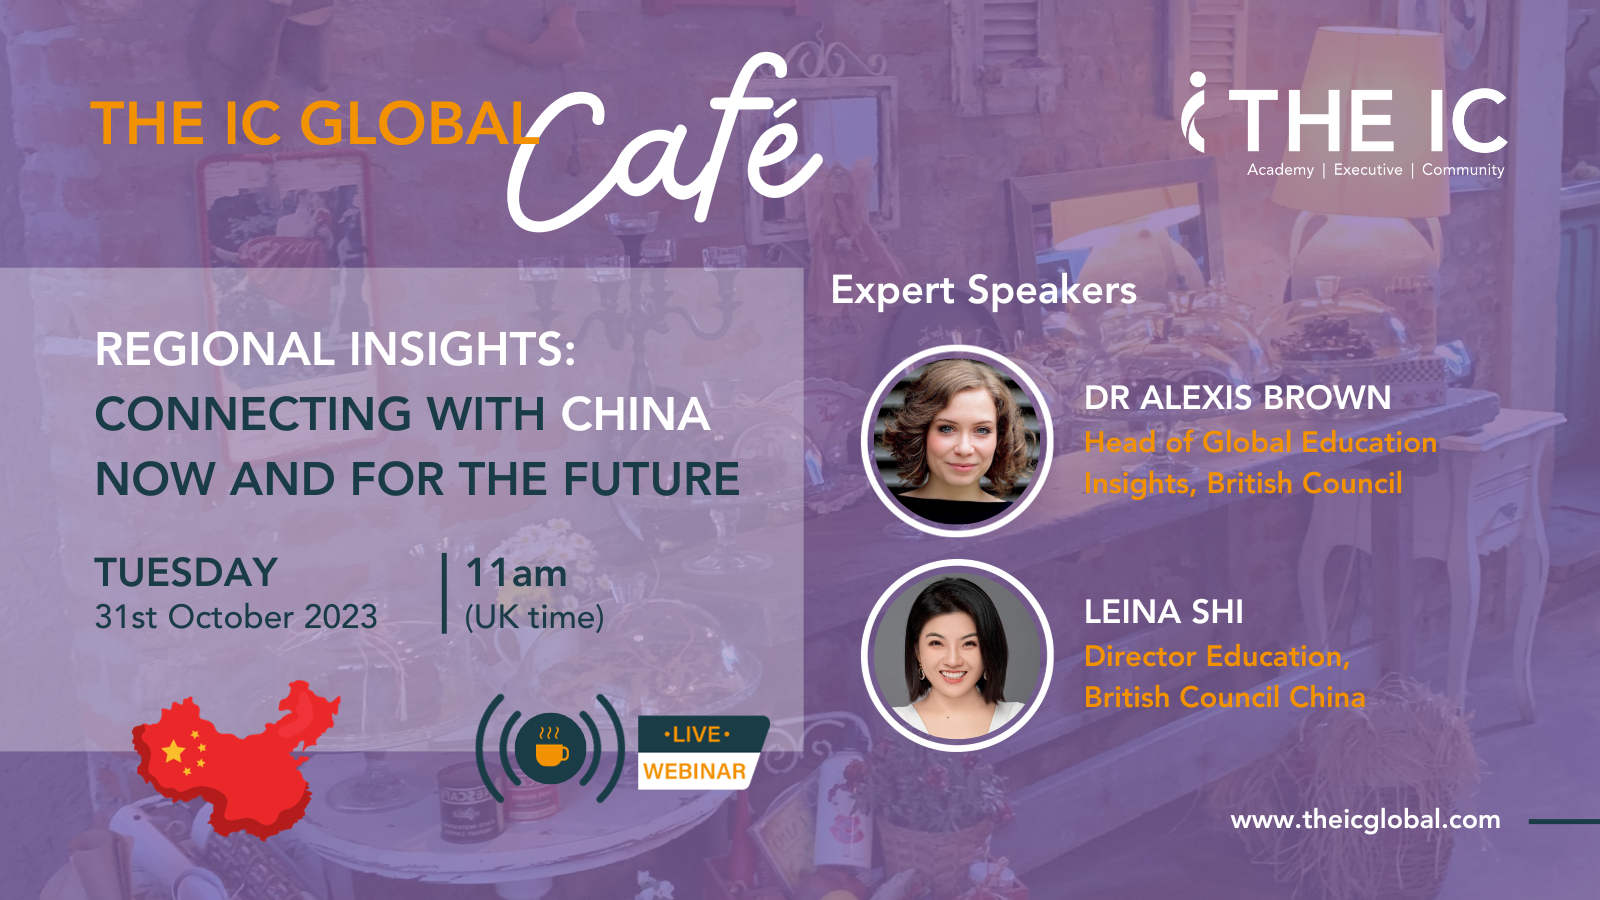 The IC Global Café: ‘Regional Insights: Connecting with China now and for the future’